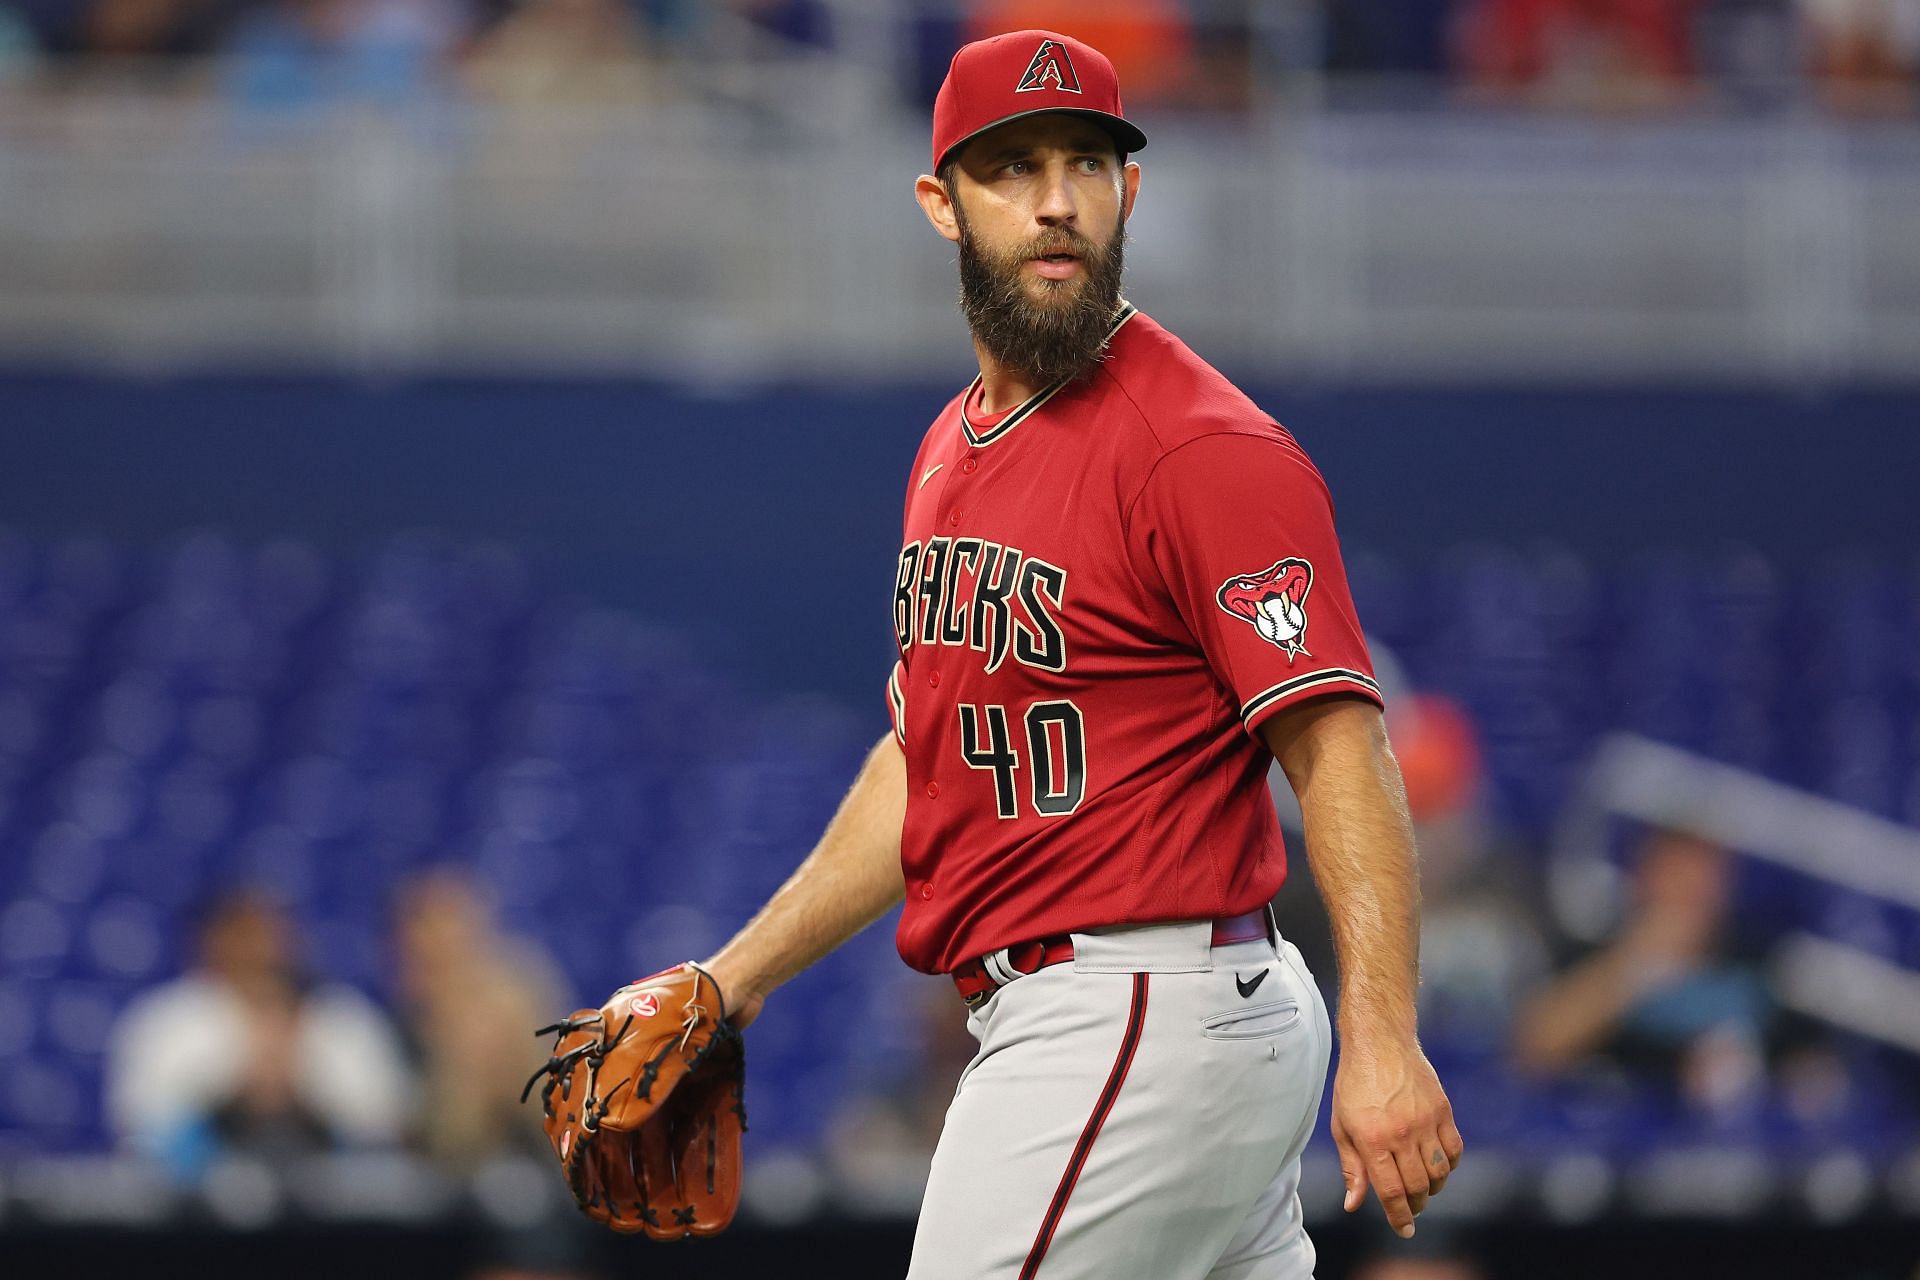 Madison Bumgarner pays awesome tribute to America on the Fourth of July